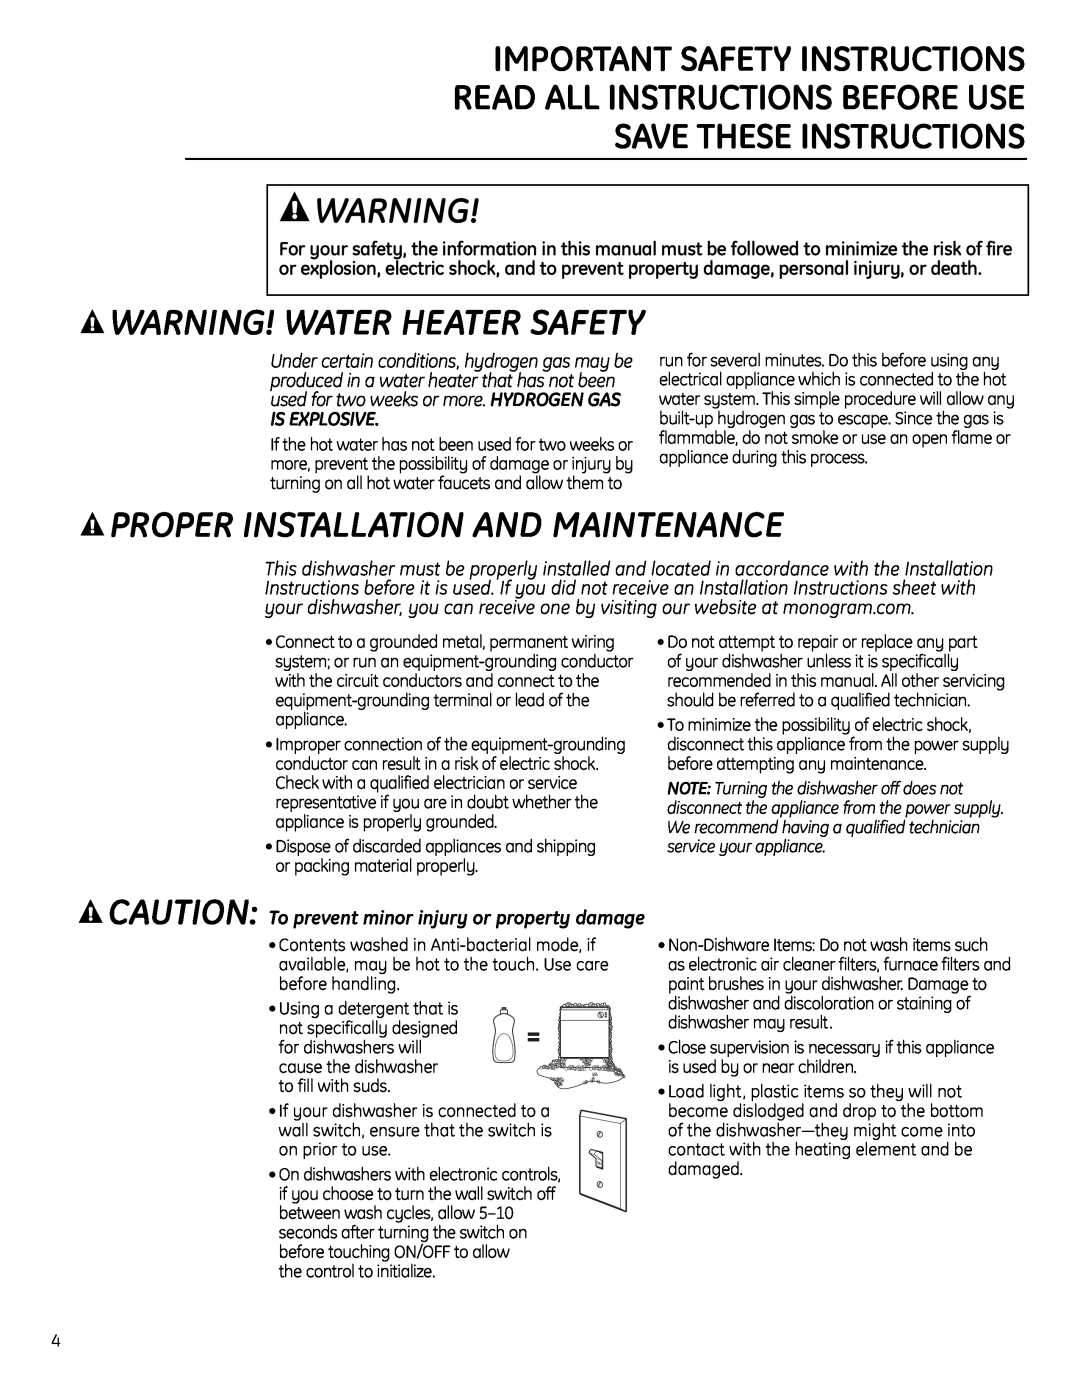 GE ZBD1870 owner manual Proper Installation And Maintenance, Is Explosive, Warning! Water Heater Safety 